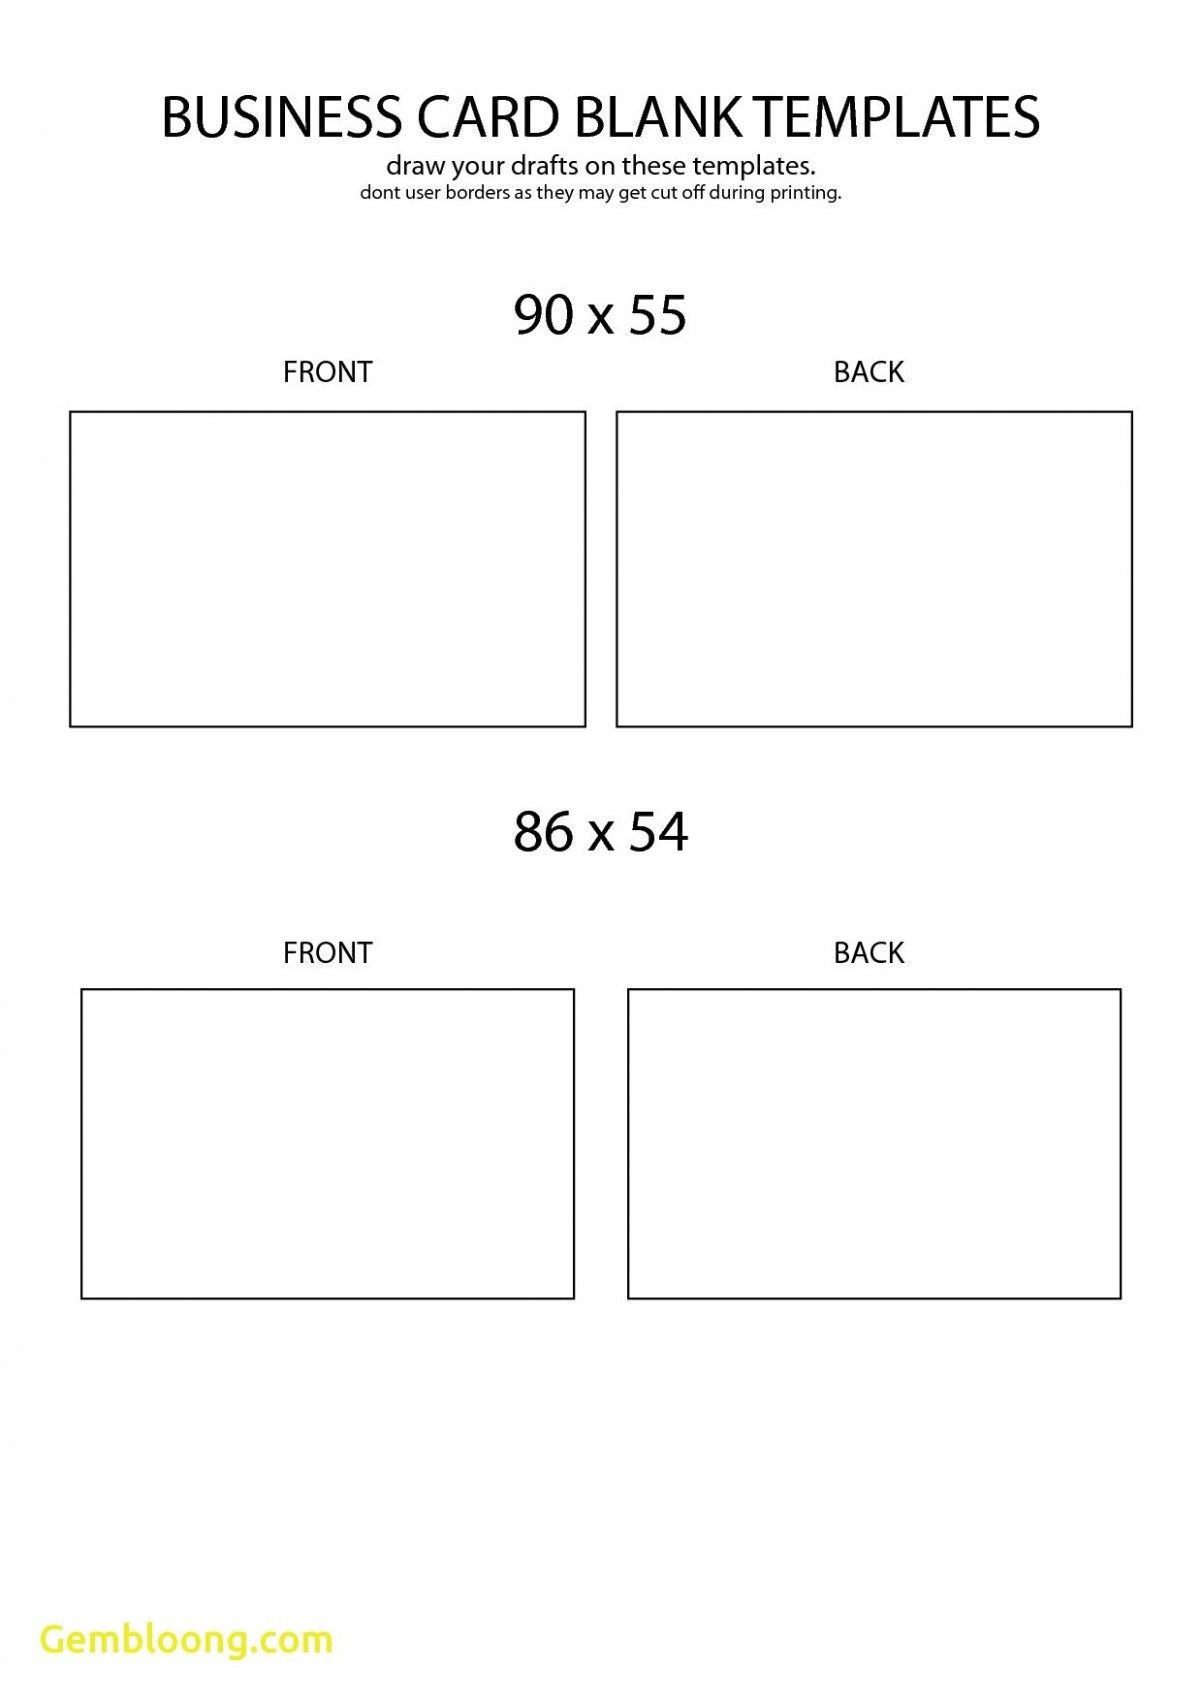 Free Blank Business Card Template Front And Back Design | Business - Free Printable Blank Business Cards